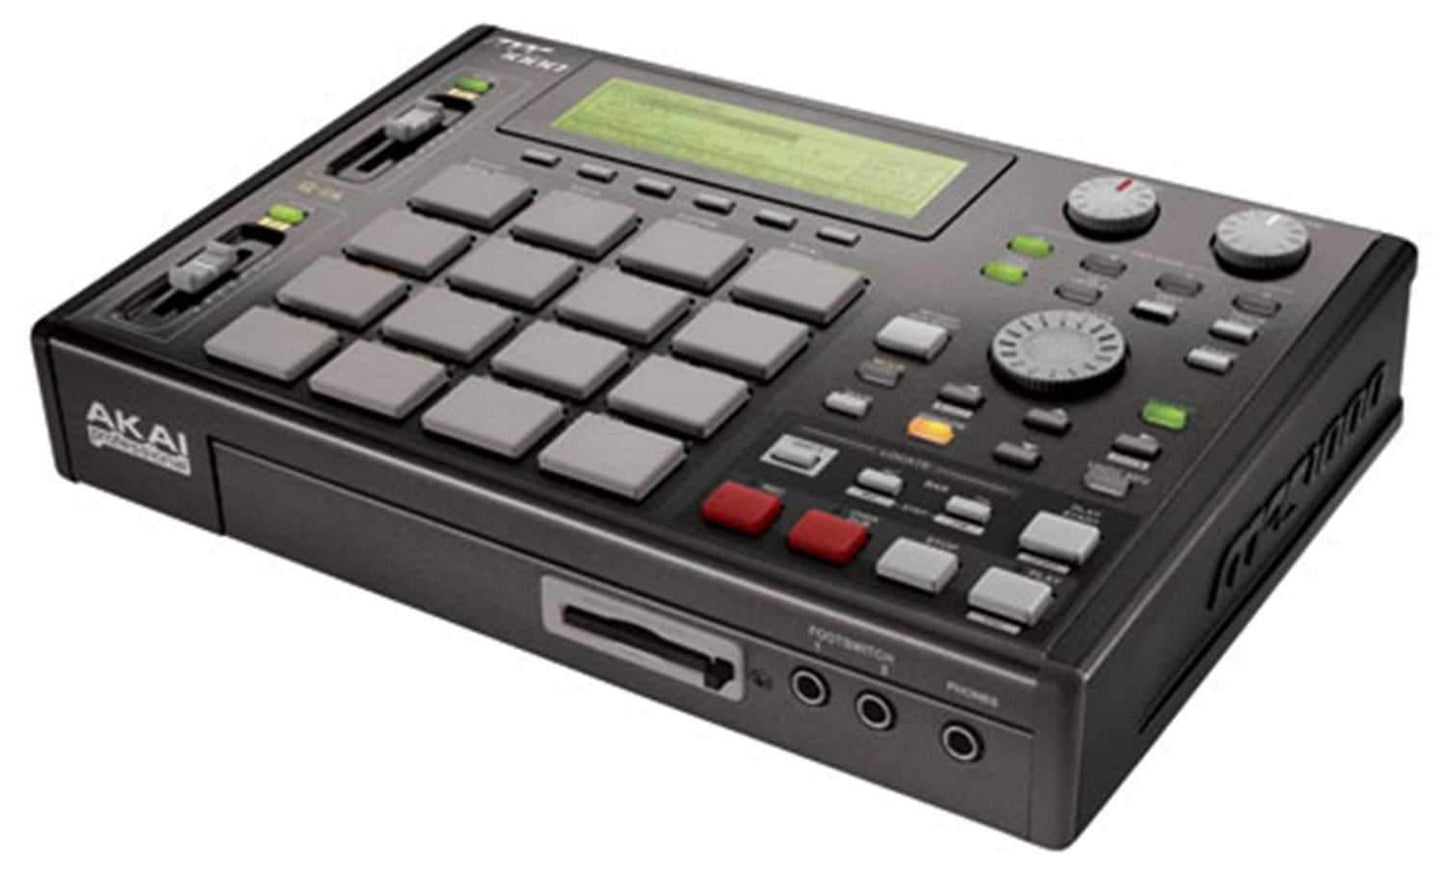 Akai MPC1000 Sampling Music Production Station - PSSL ProSound and Stage Lighting